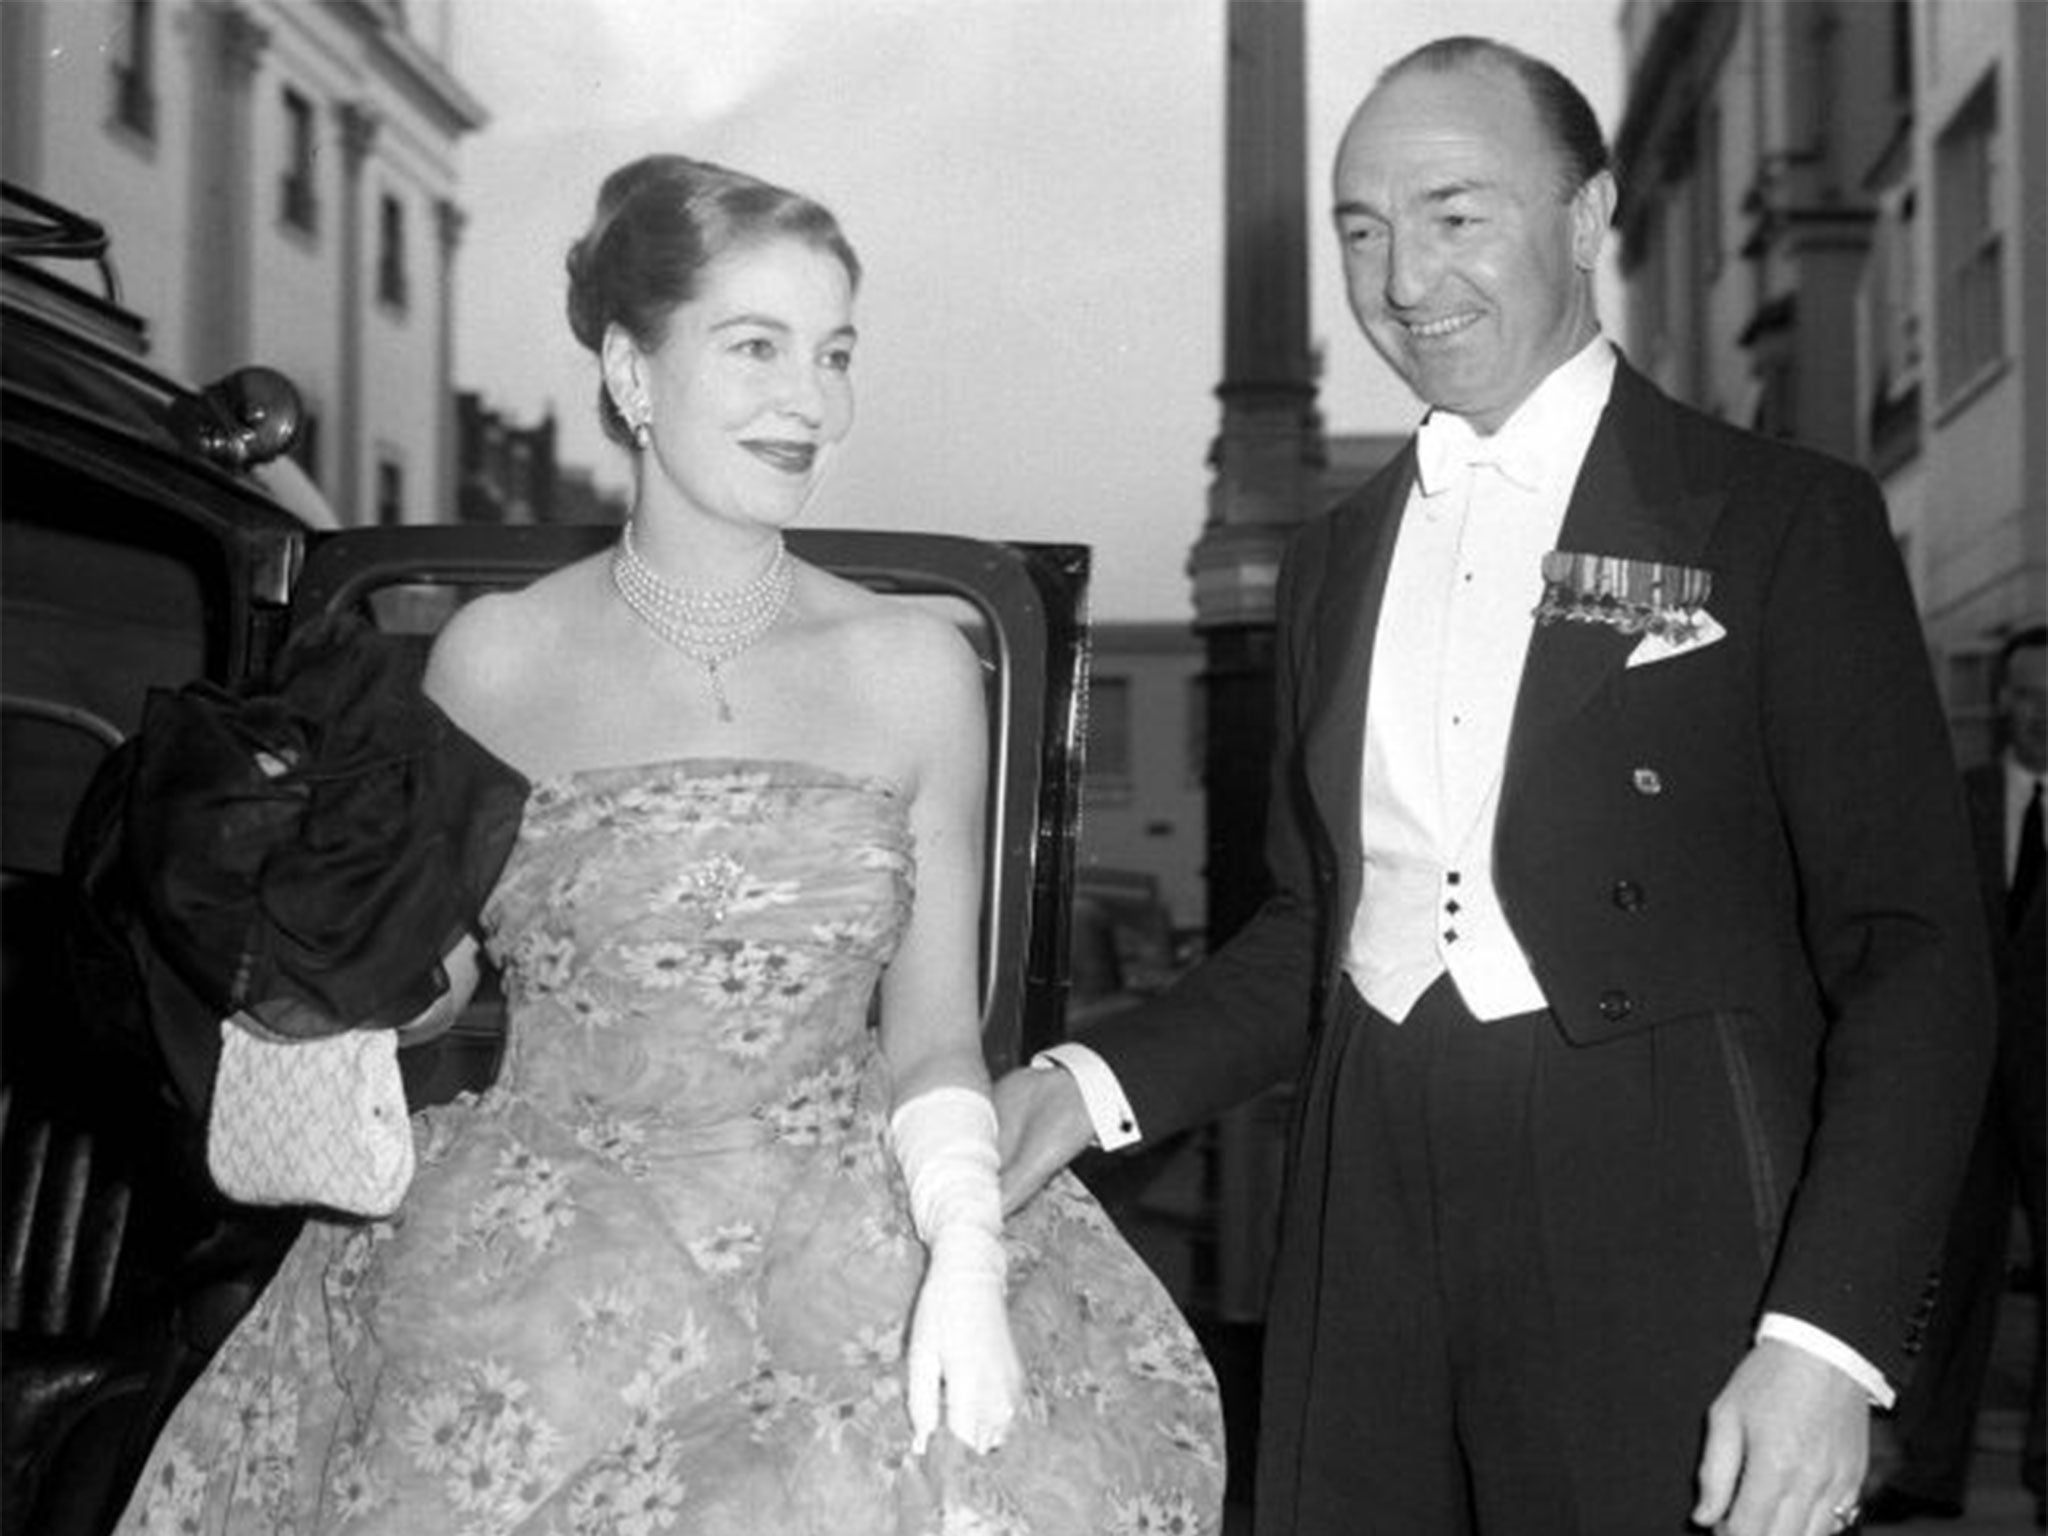 John Profumo and his wife Valerie Hobson in 1959